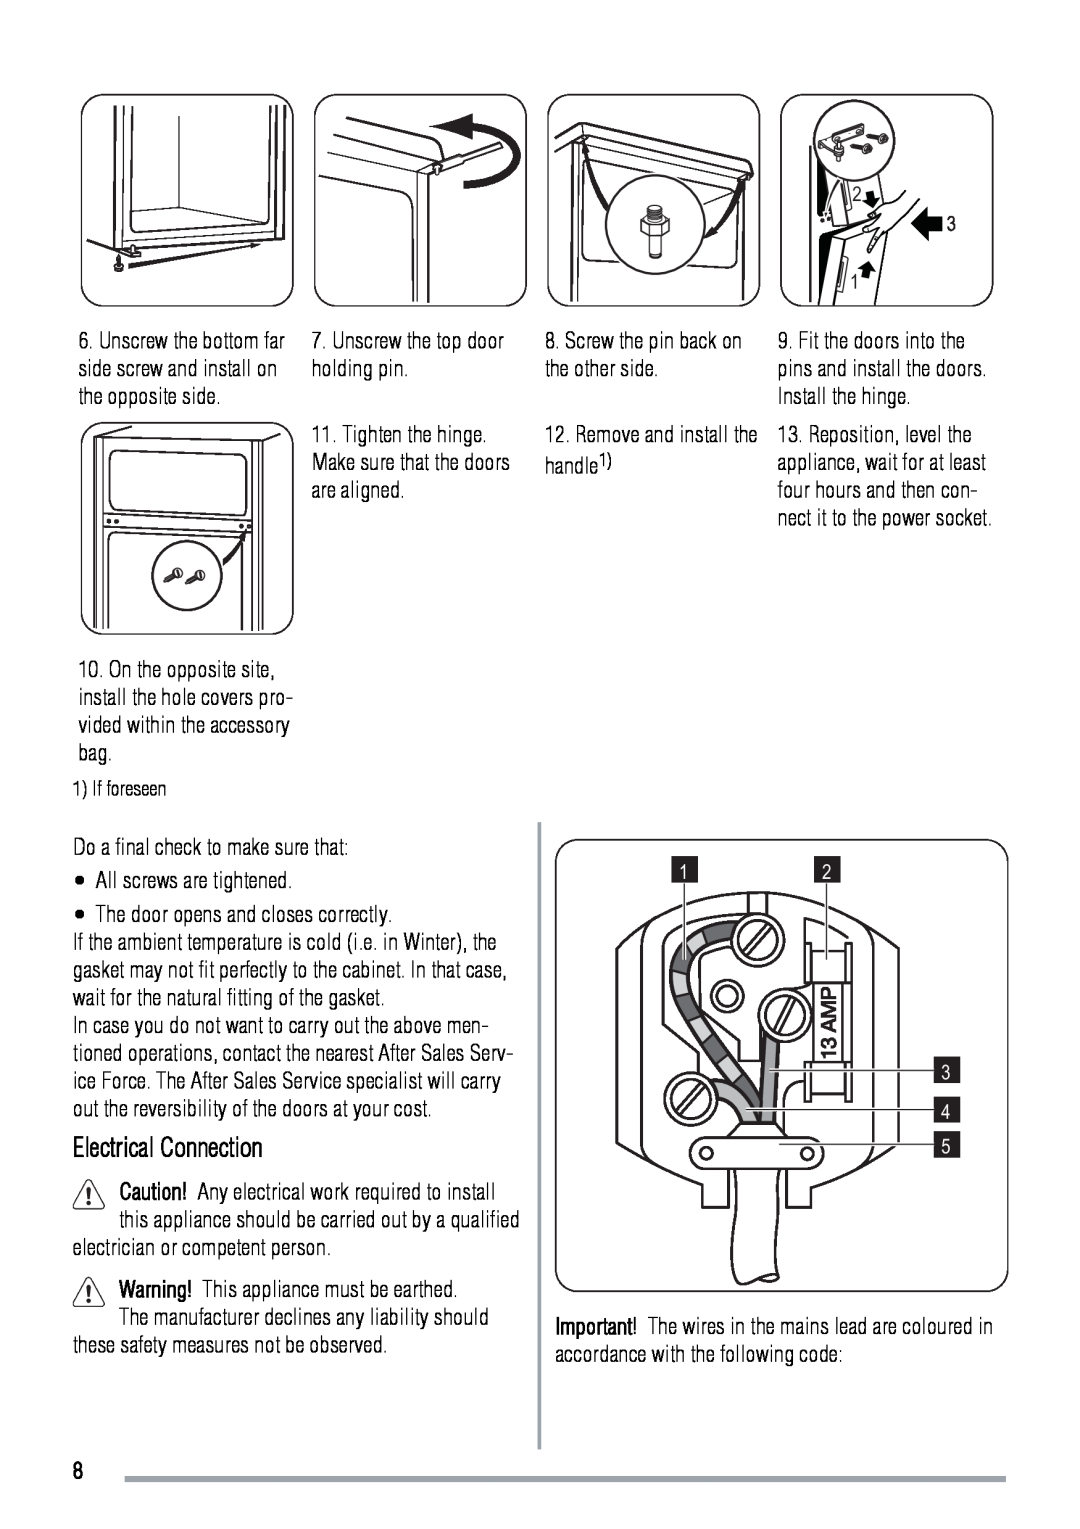 Zanussi ZRT318W user manual Electrical Connection, Unscrew the top door holding pin, Remove and install the handle1 